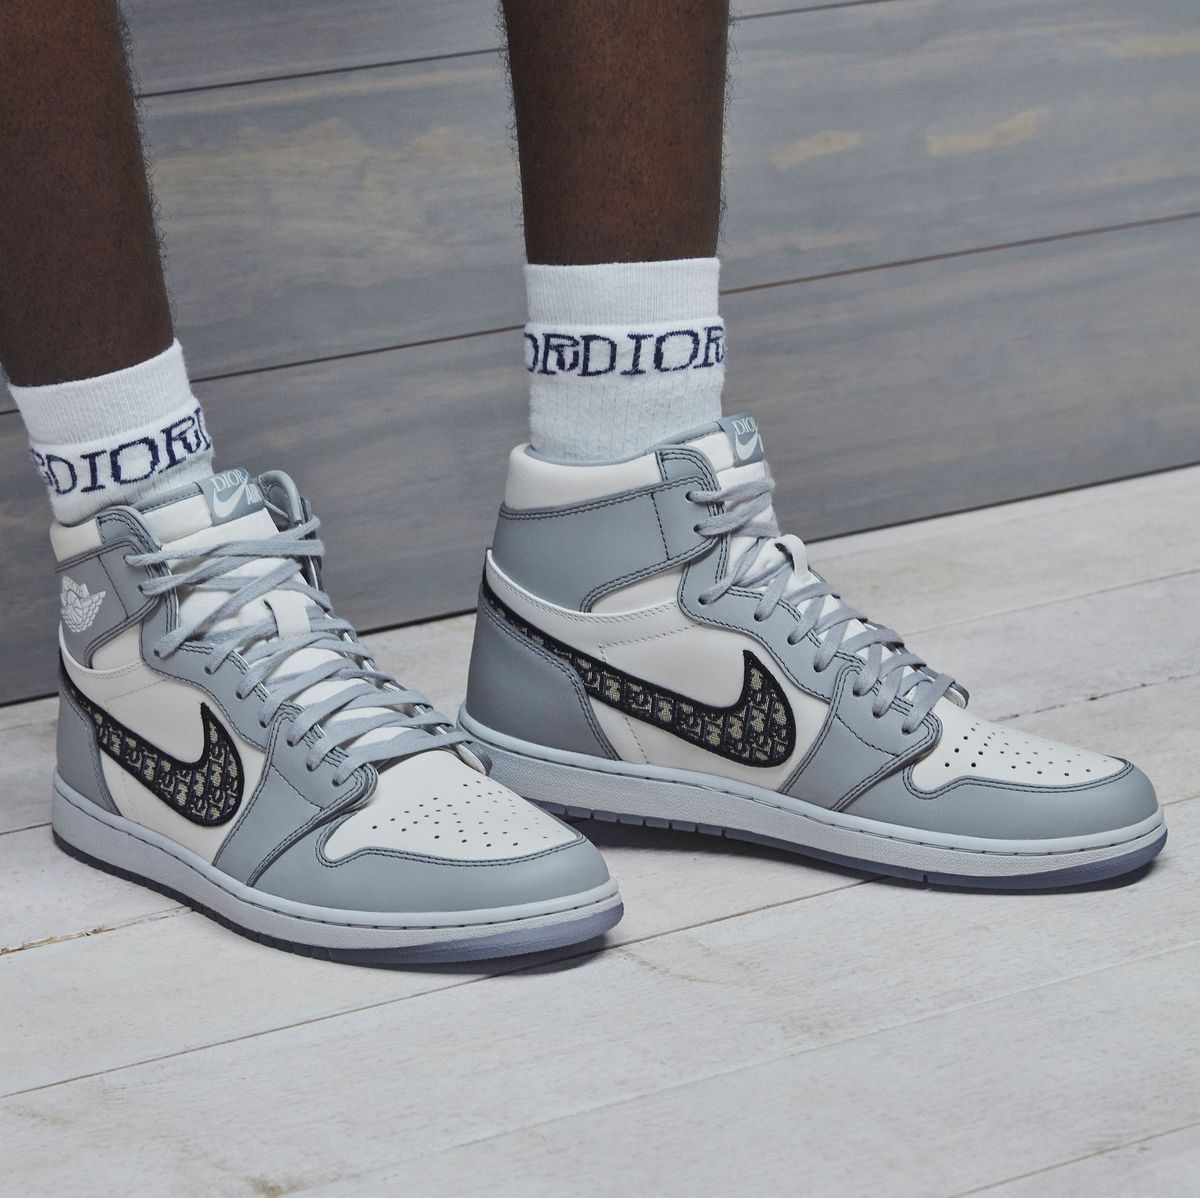 ankle language Ultimate Dior Air Jordan 1 First Look, Release Date, and Details